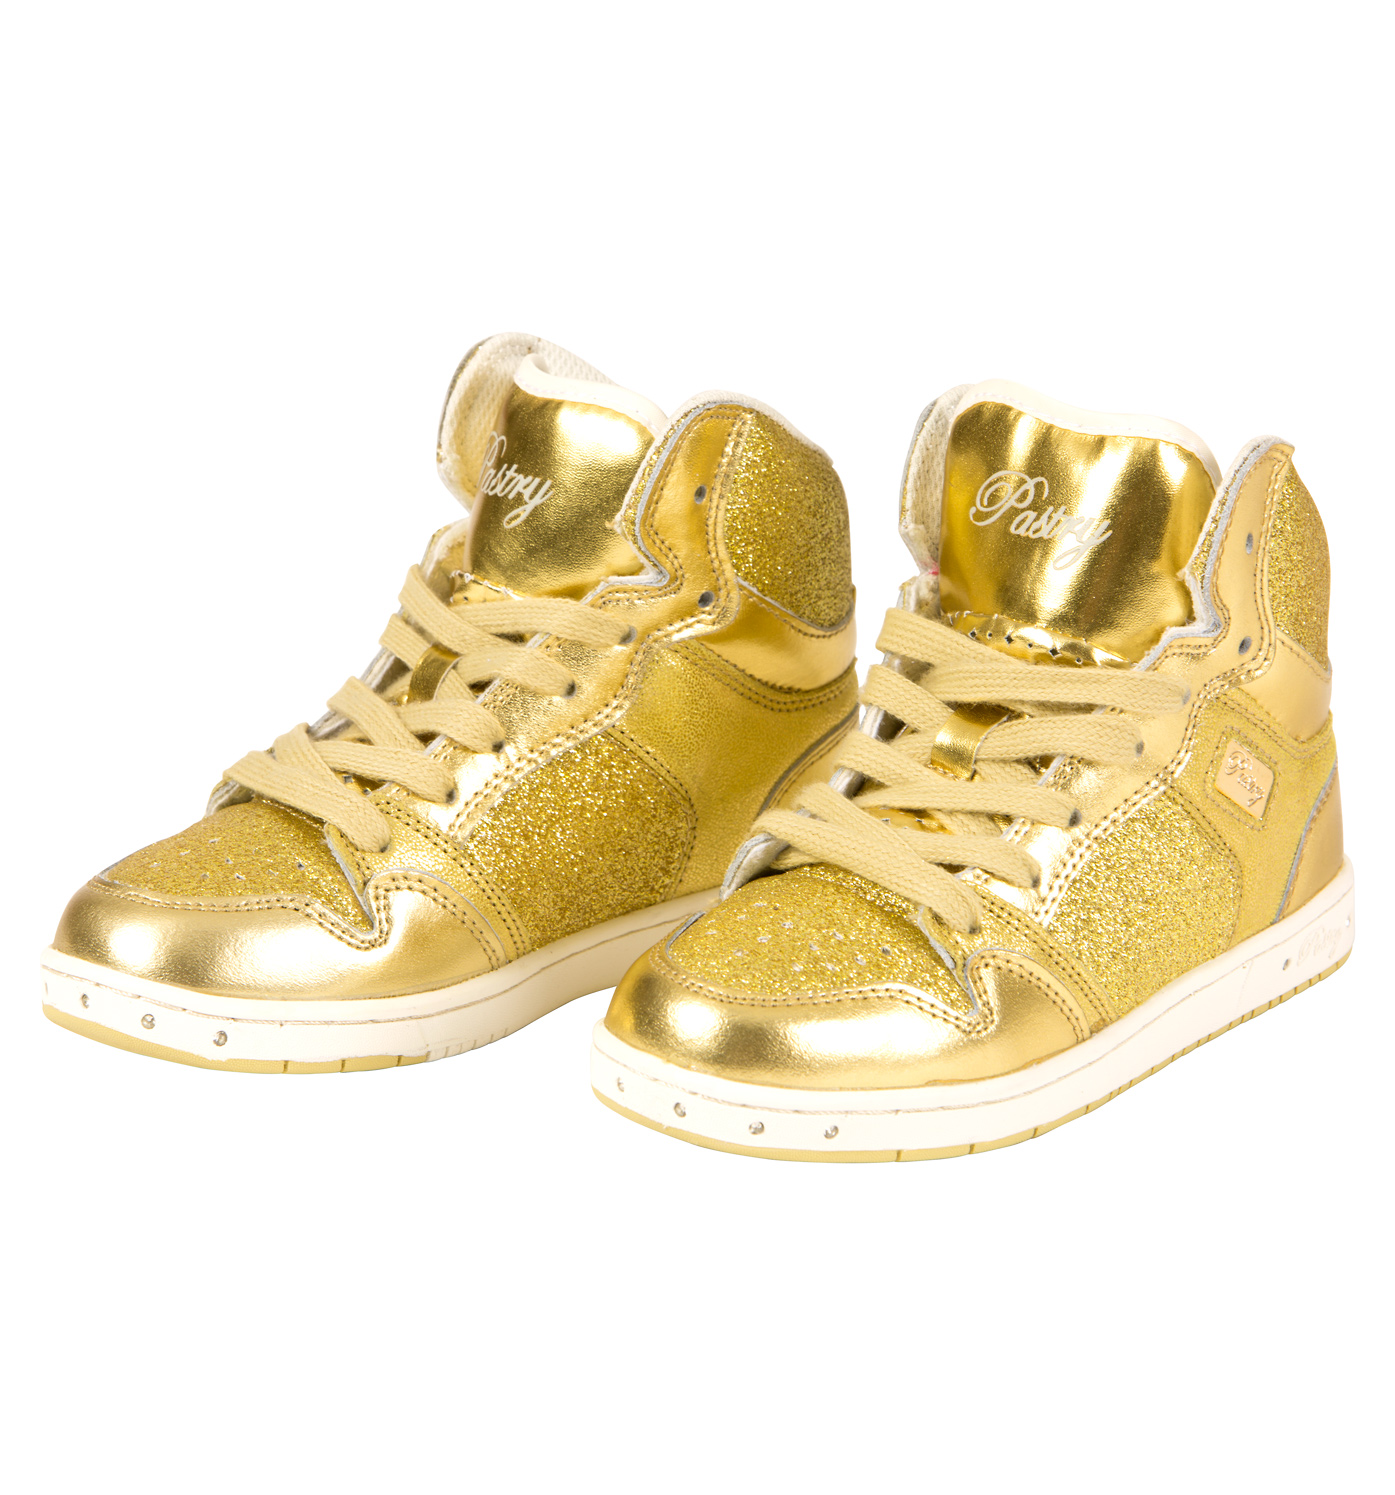 gold sneakers adult. loading zoom JAZJHWD